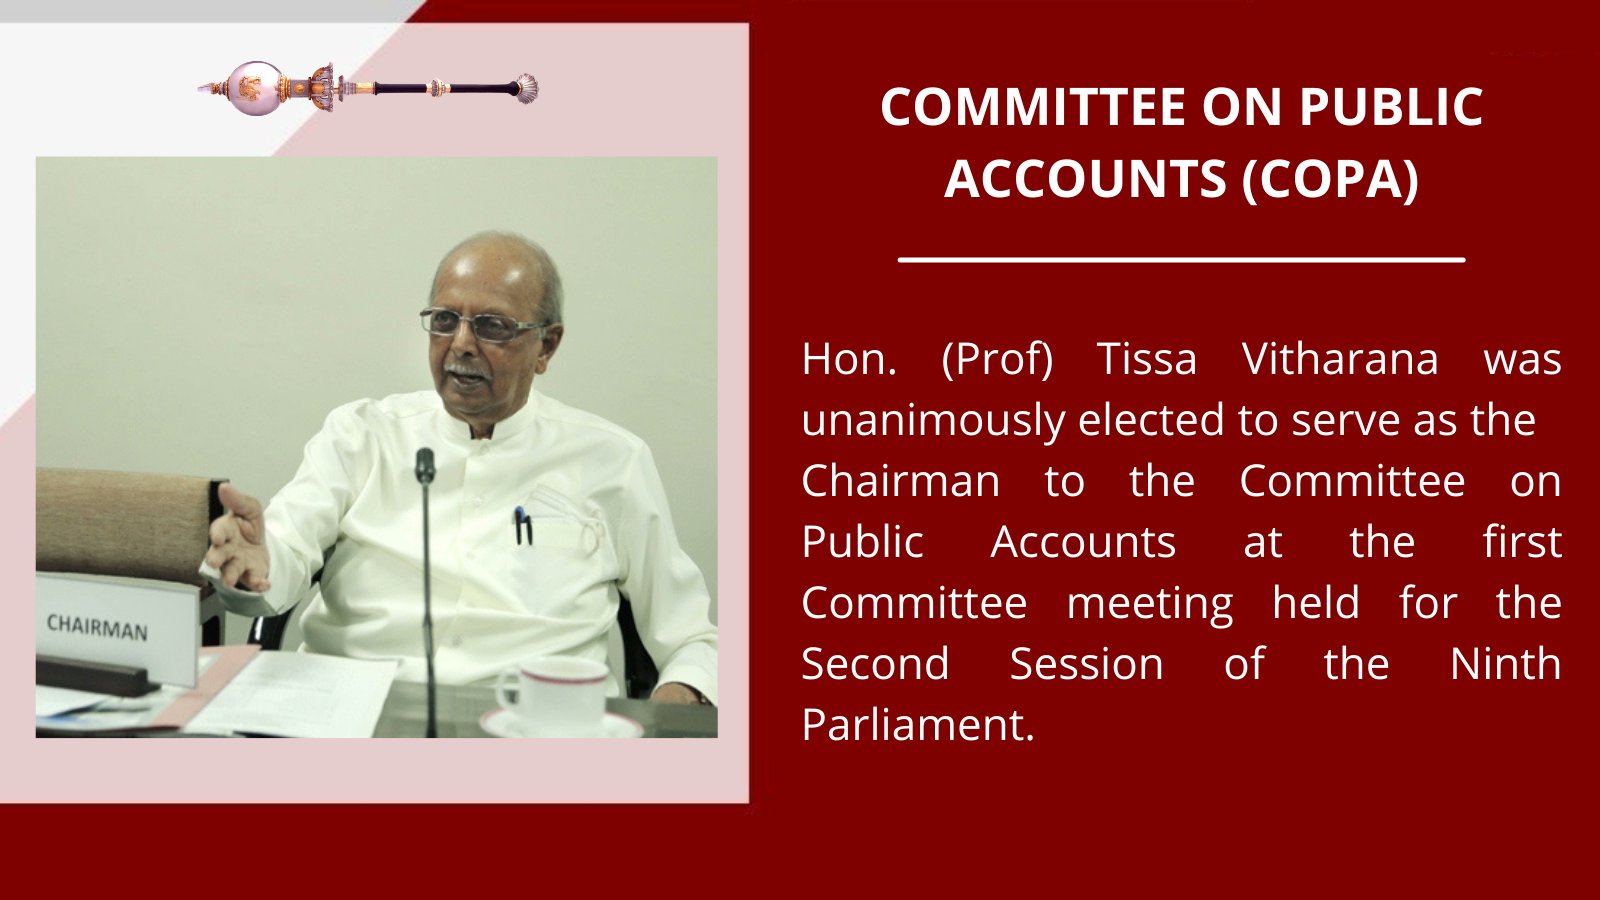 Prof. Tissa Vitharana appointed as the Chairman of the COPA